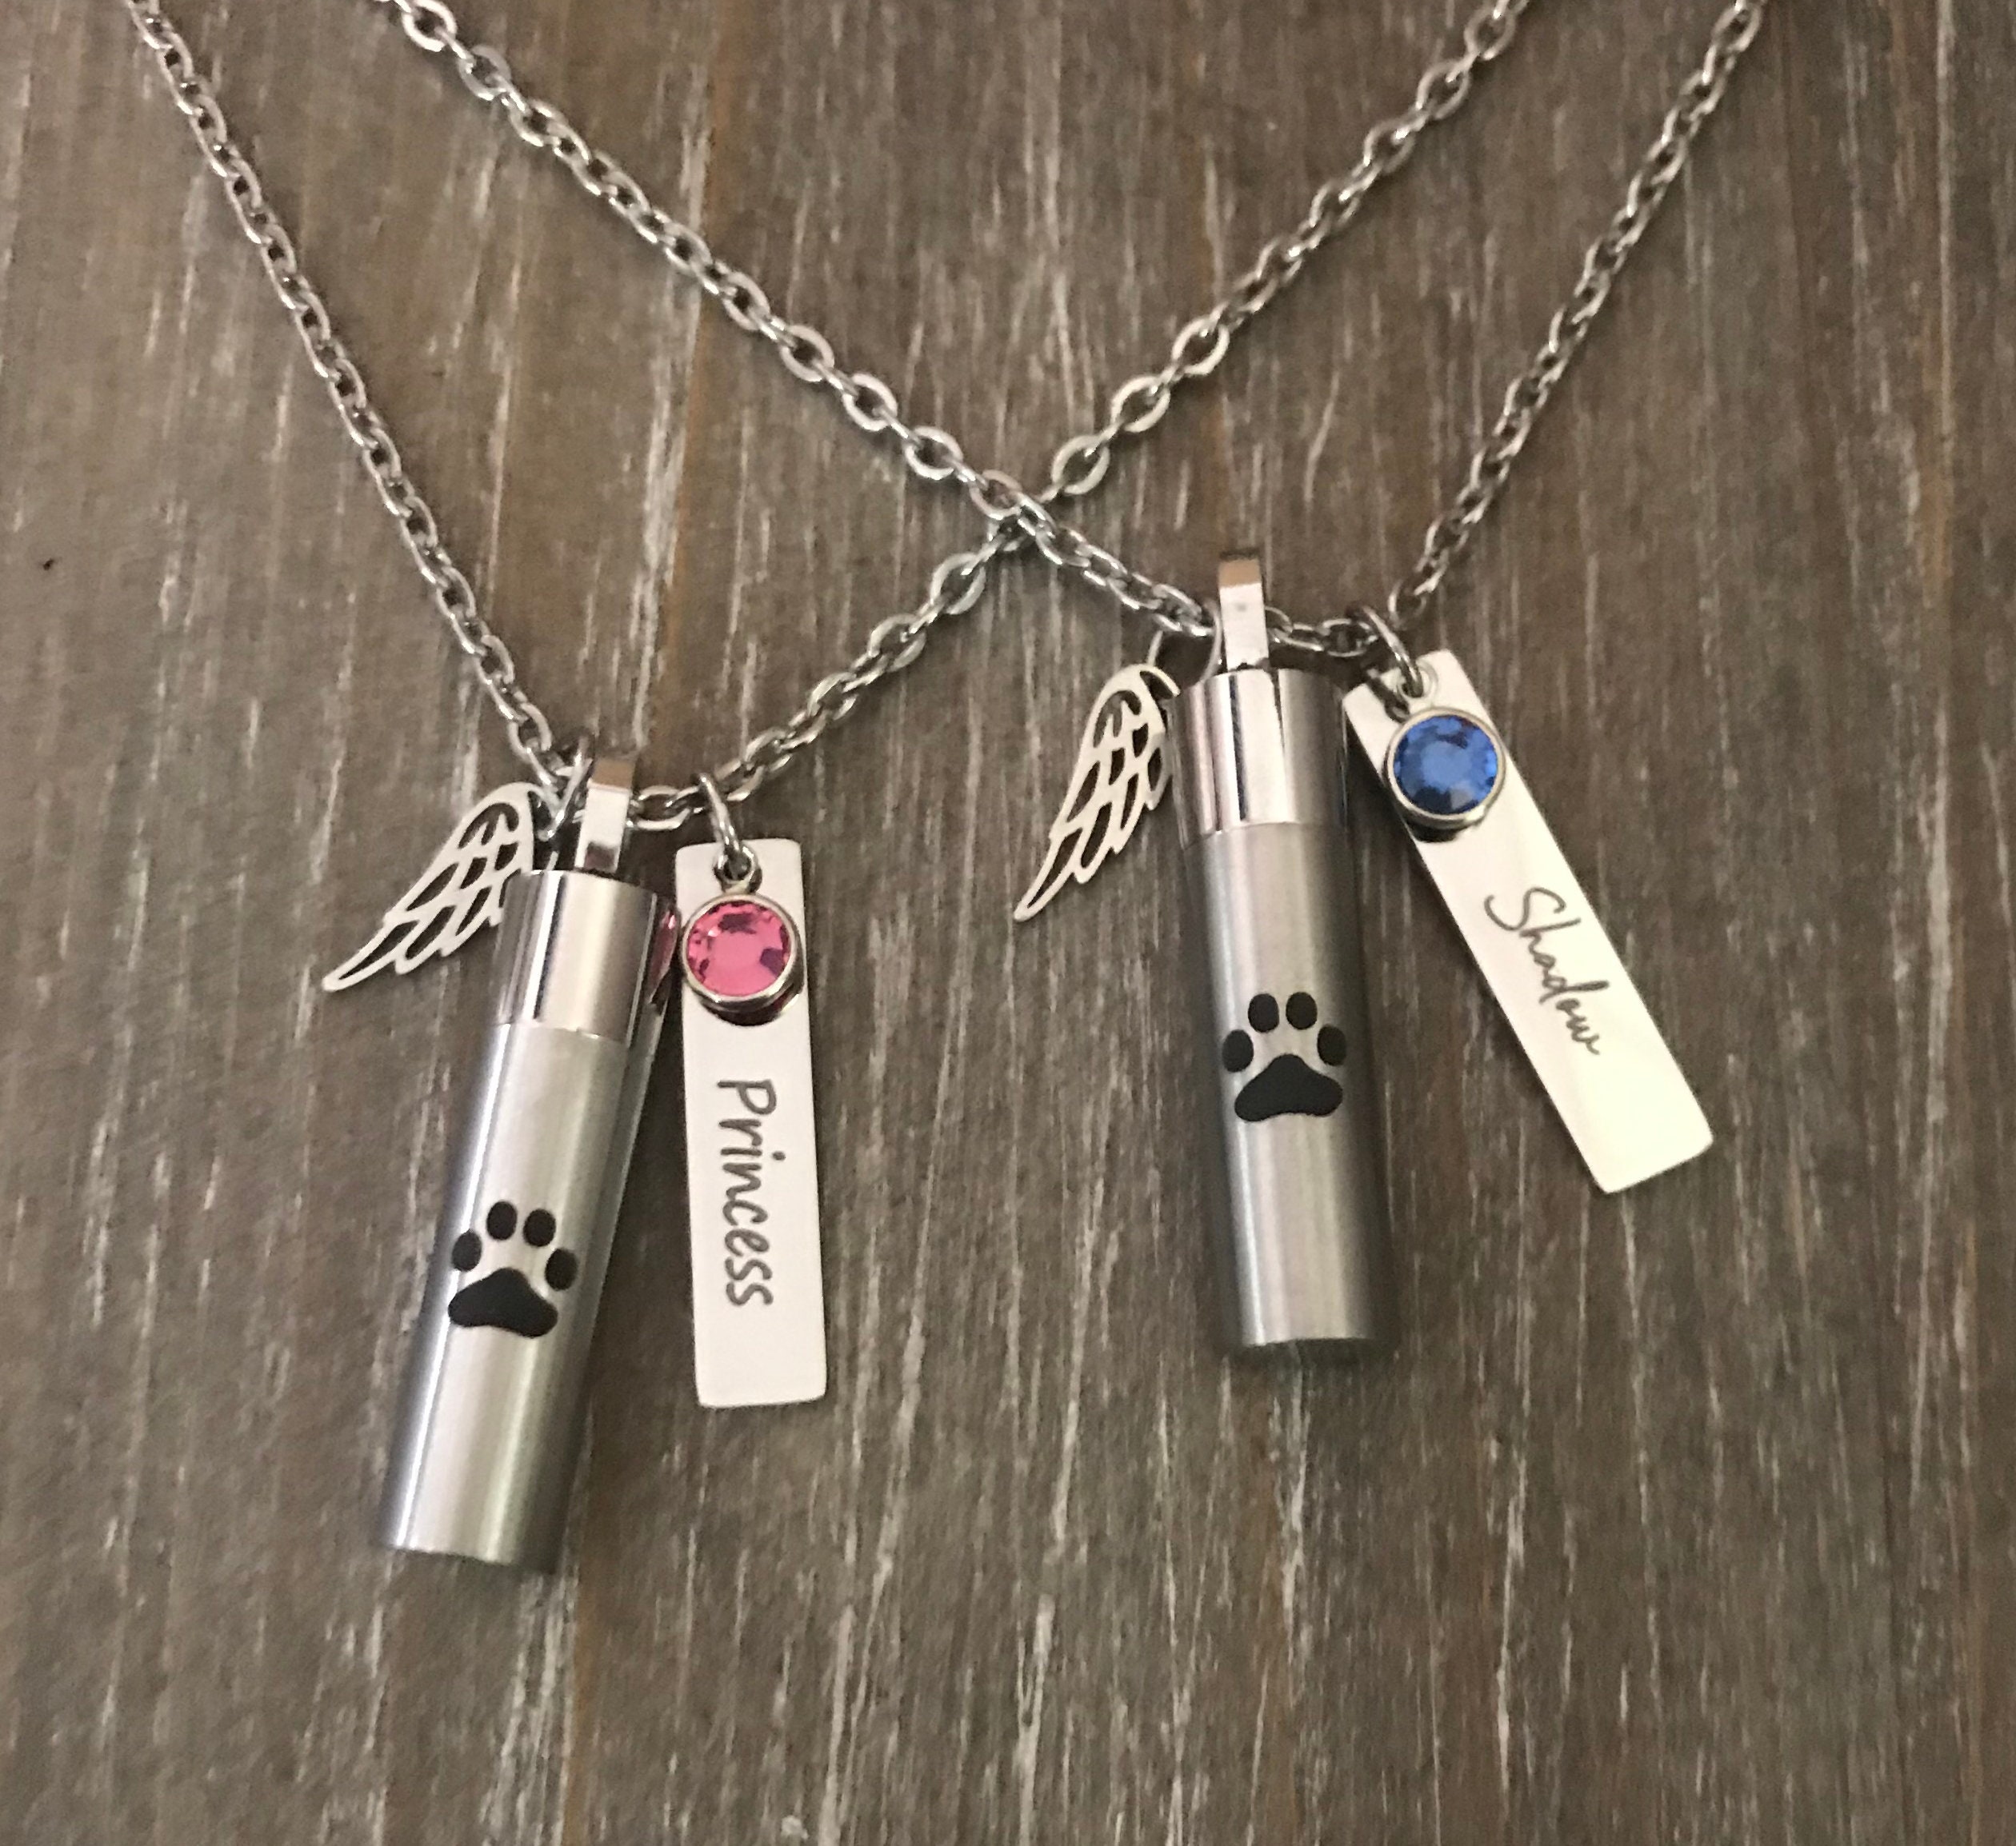 Pet cremation jewelry pet urn ashes necklace pet memorial necklace